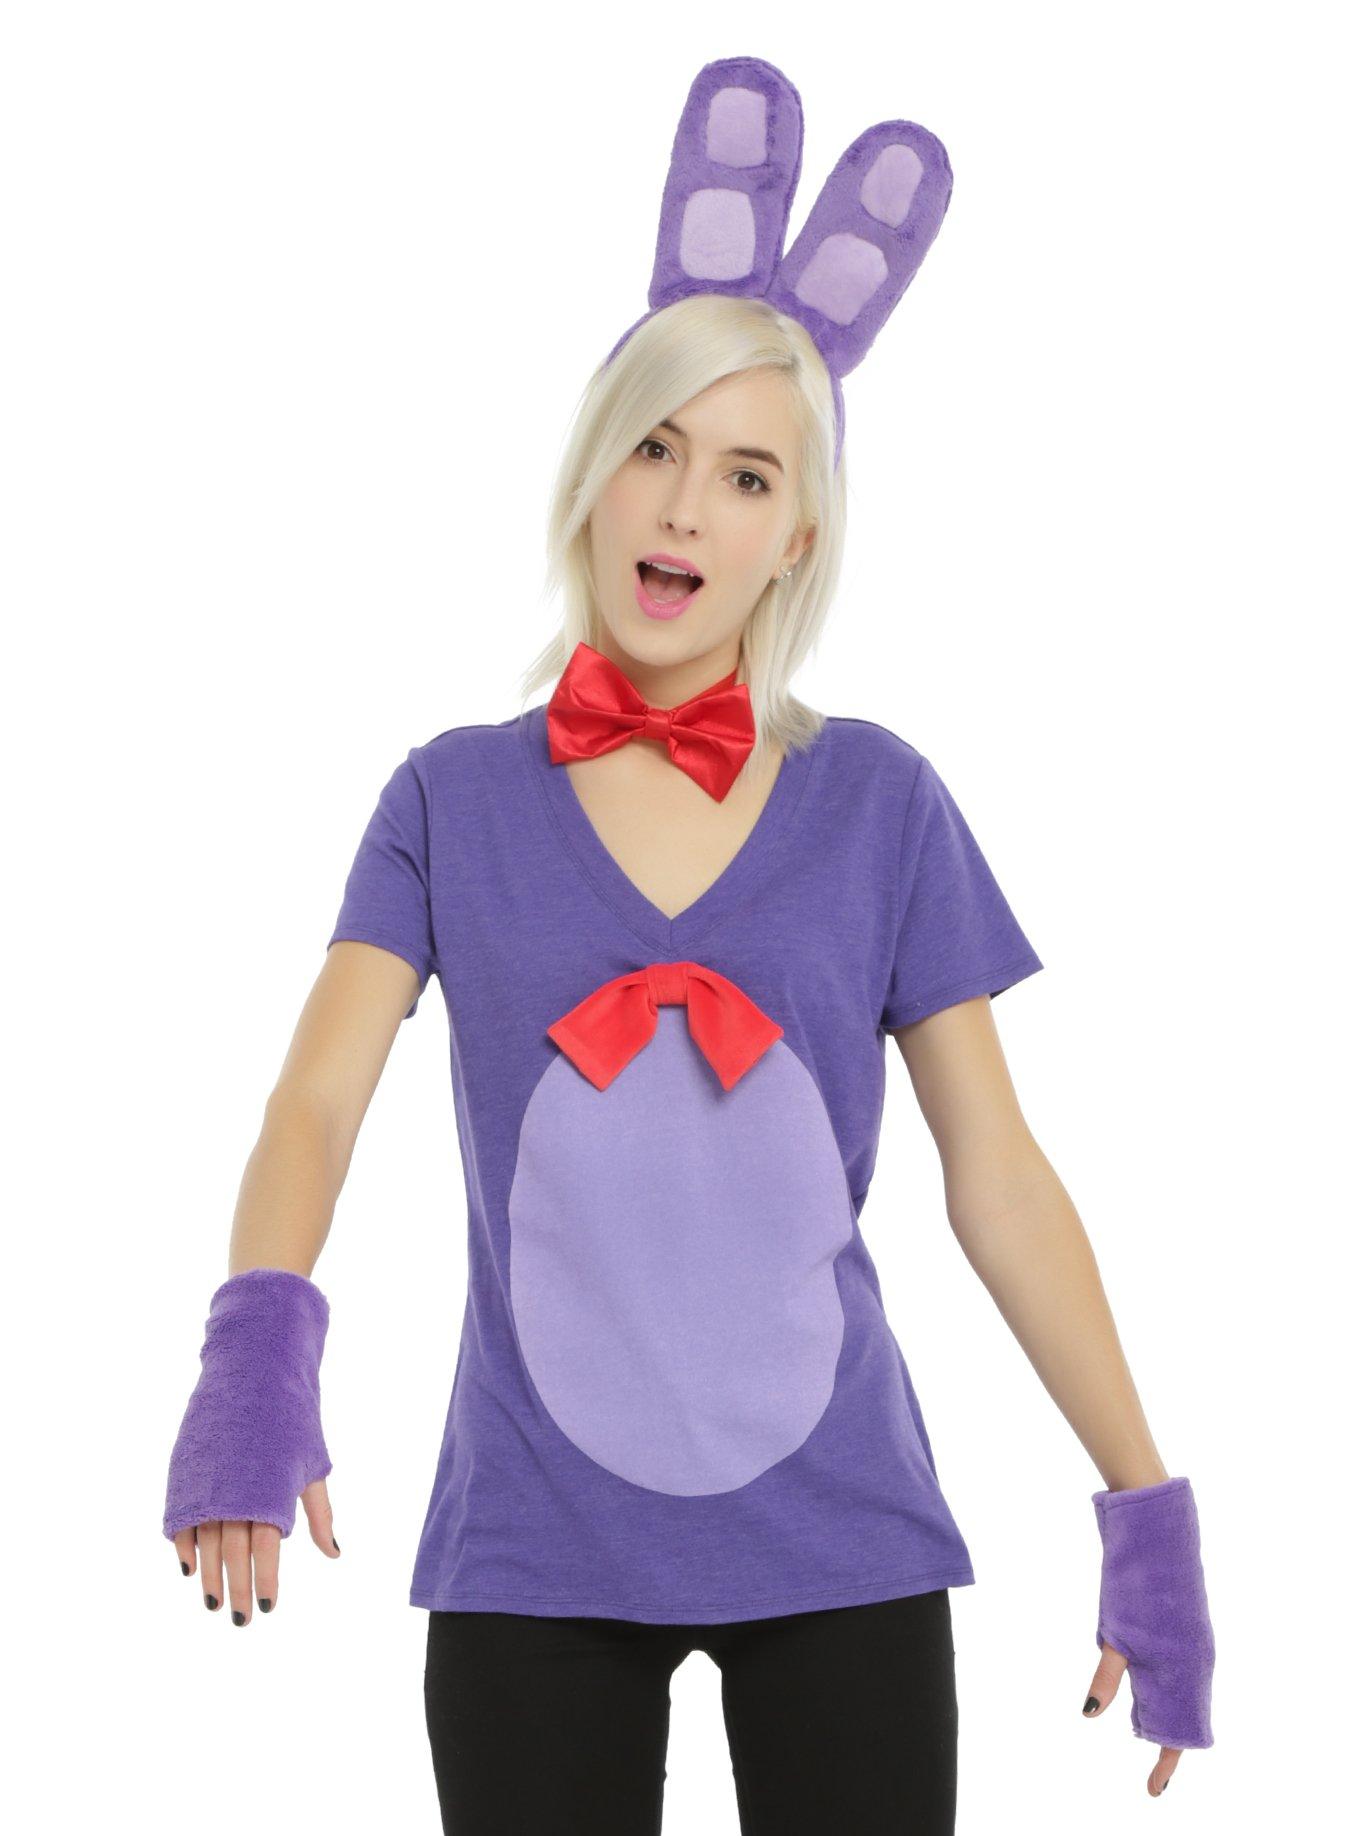 Bonnie (Toy Story 3) Costume for Cosplay & Halloween 2023